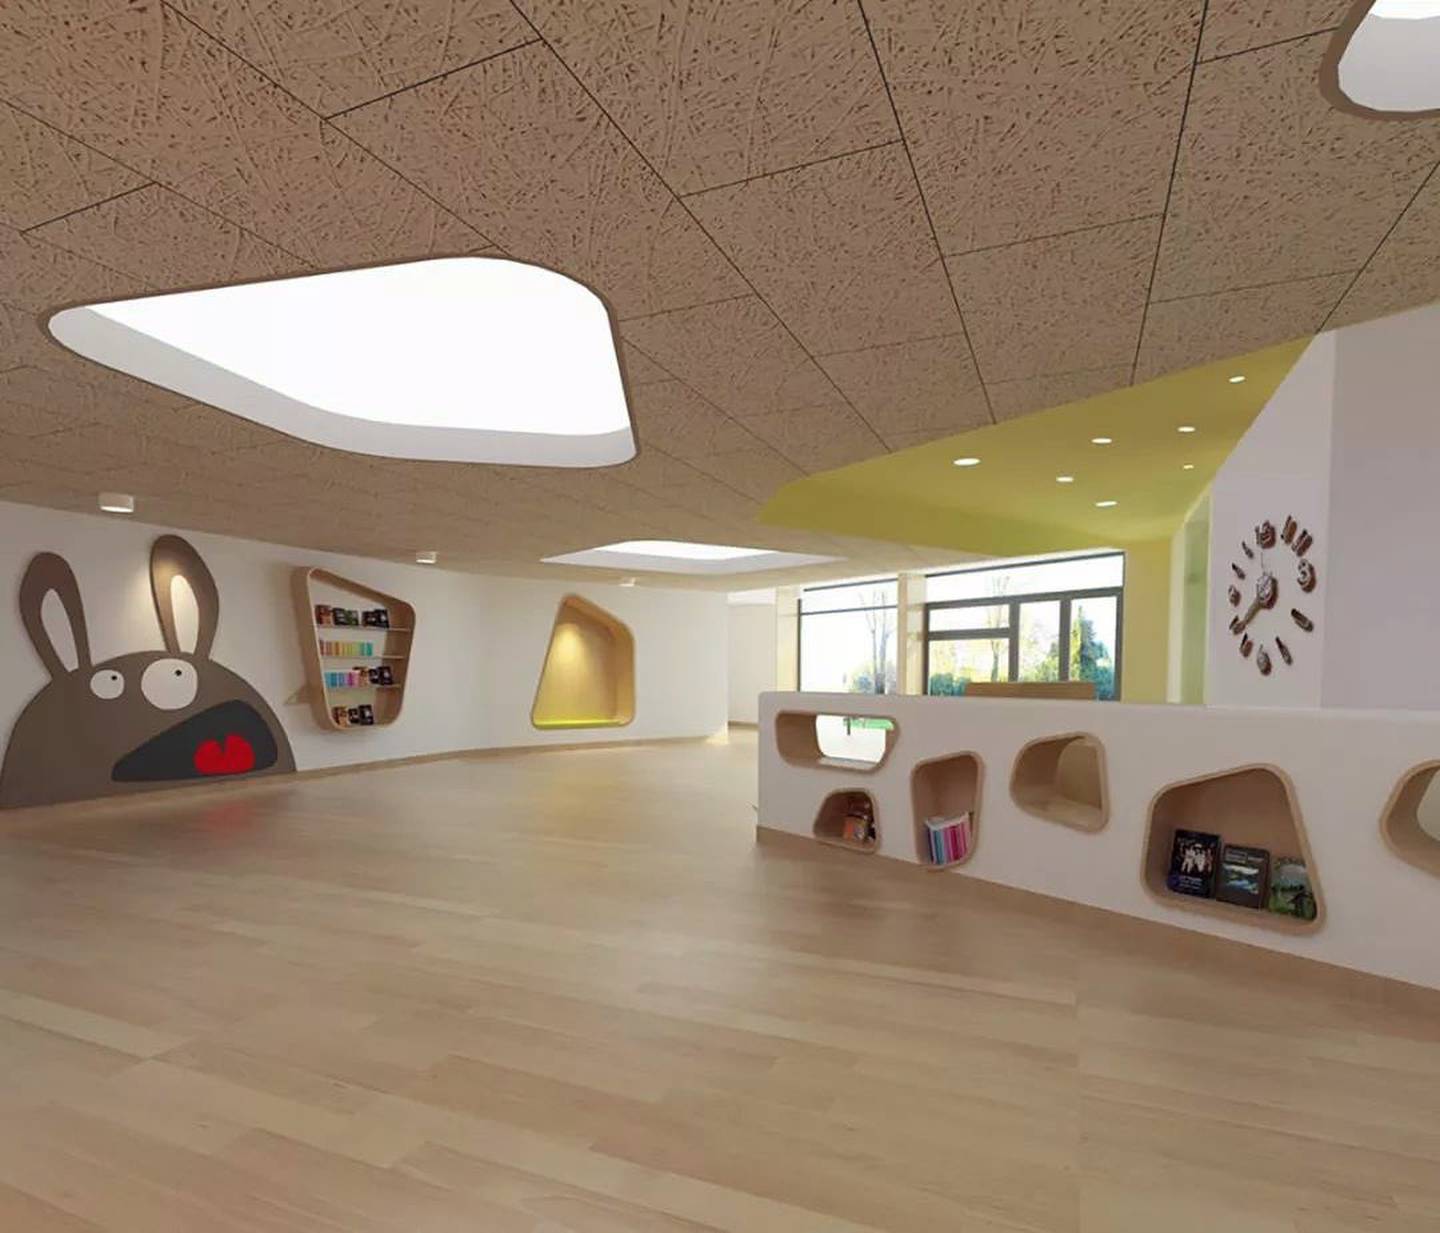 A nursery school in China designed by Egyptian green architecture firm ECOnsult, which designed it to protect the children inside from high levels of pollution. Courtesy of ECOnsult